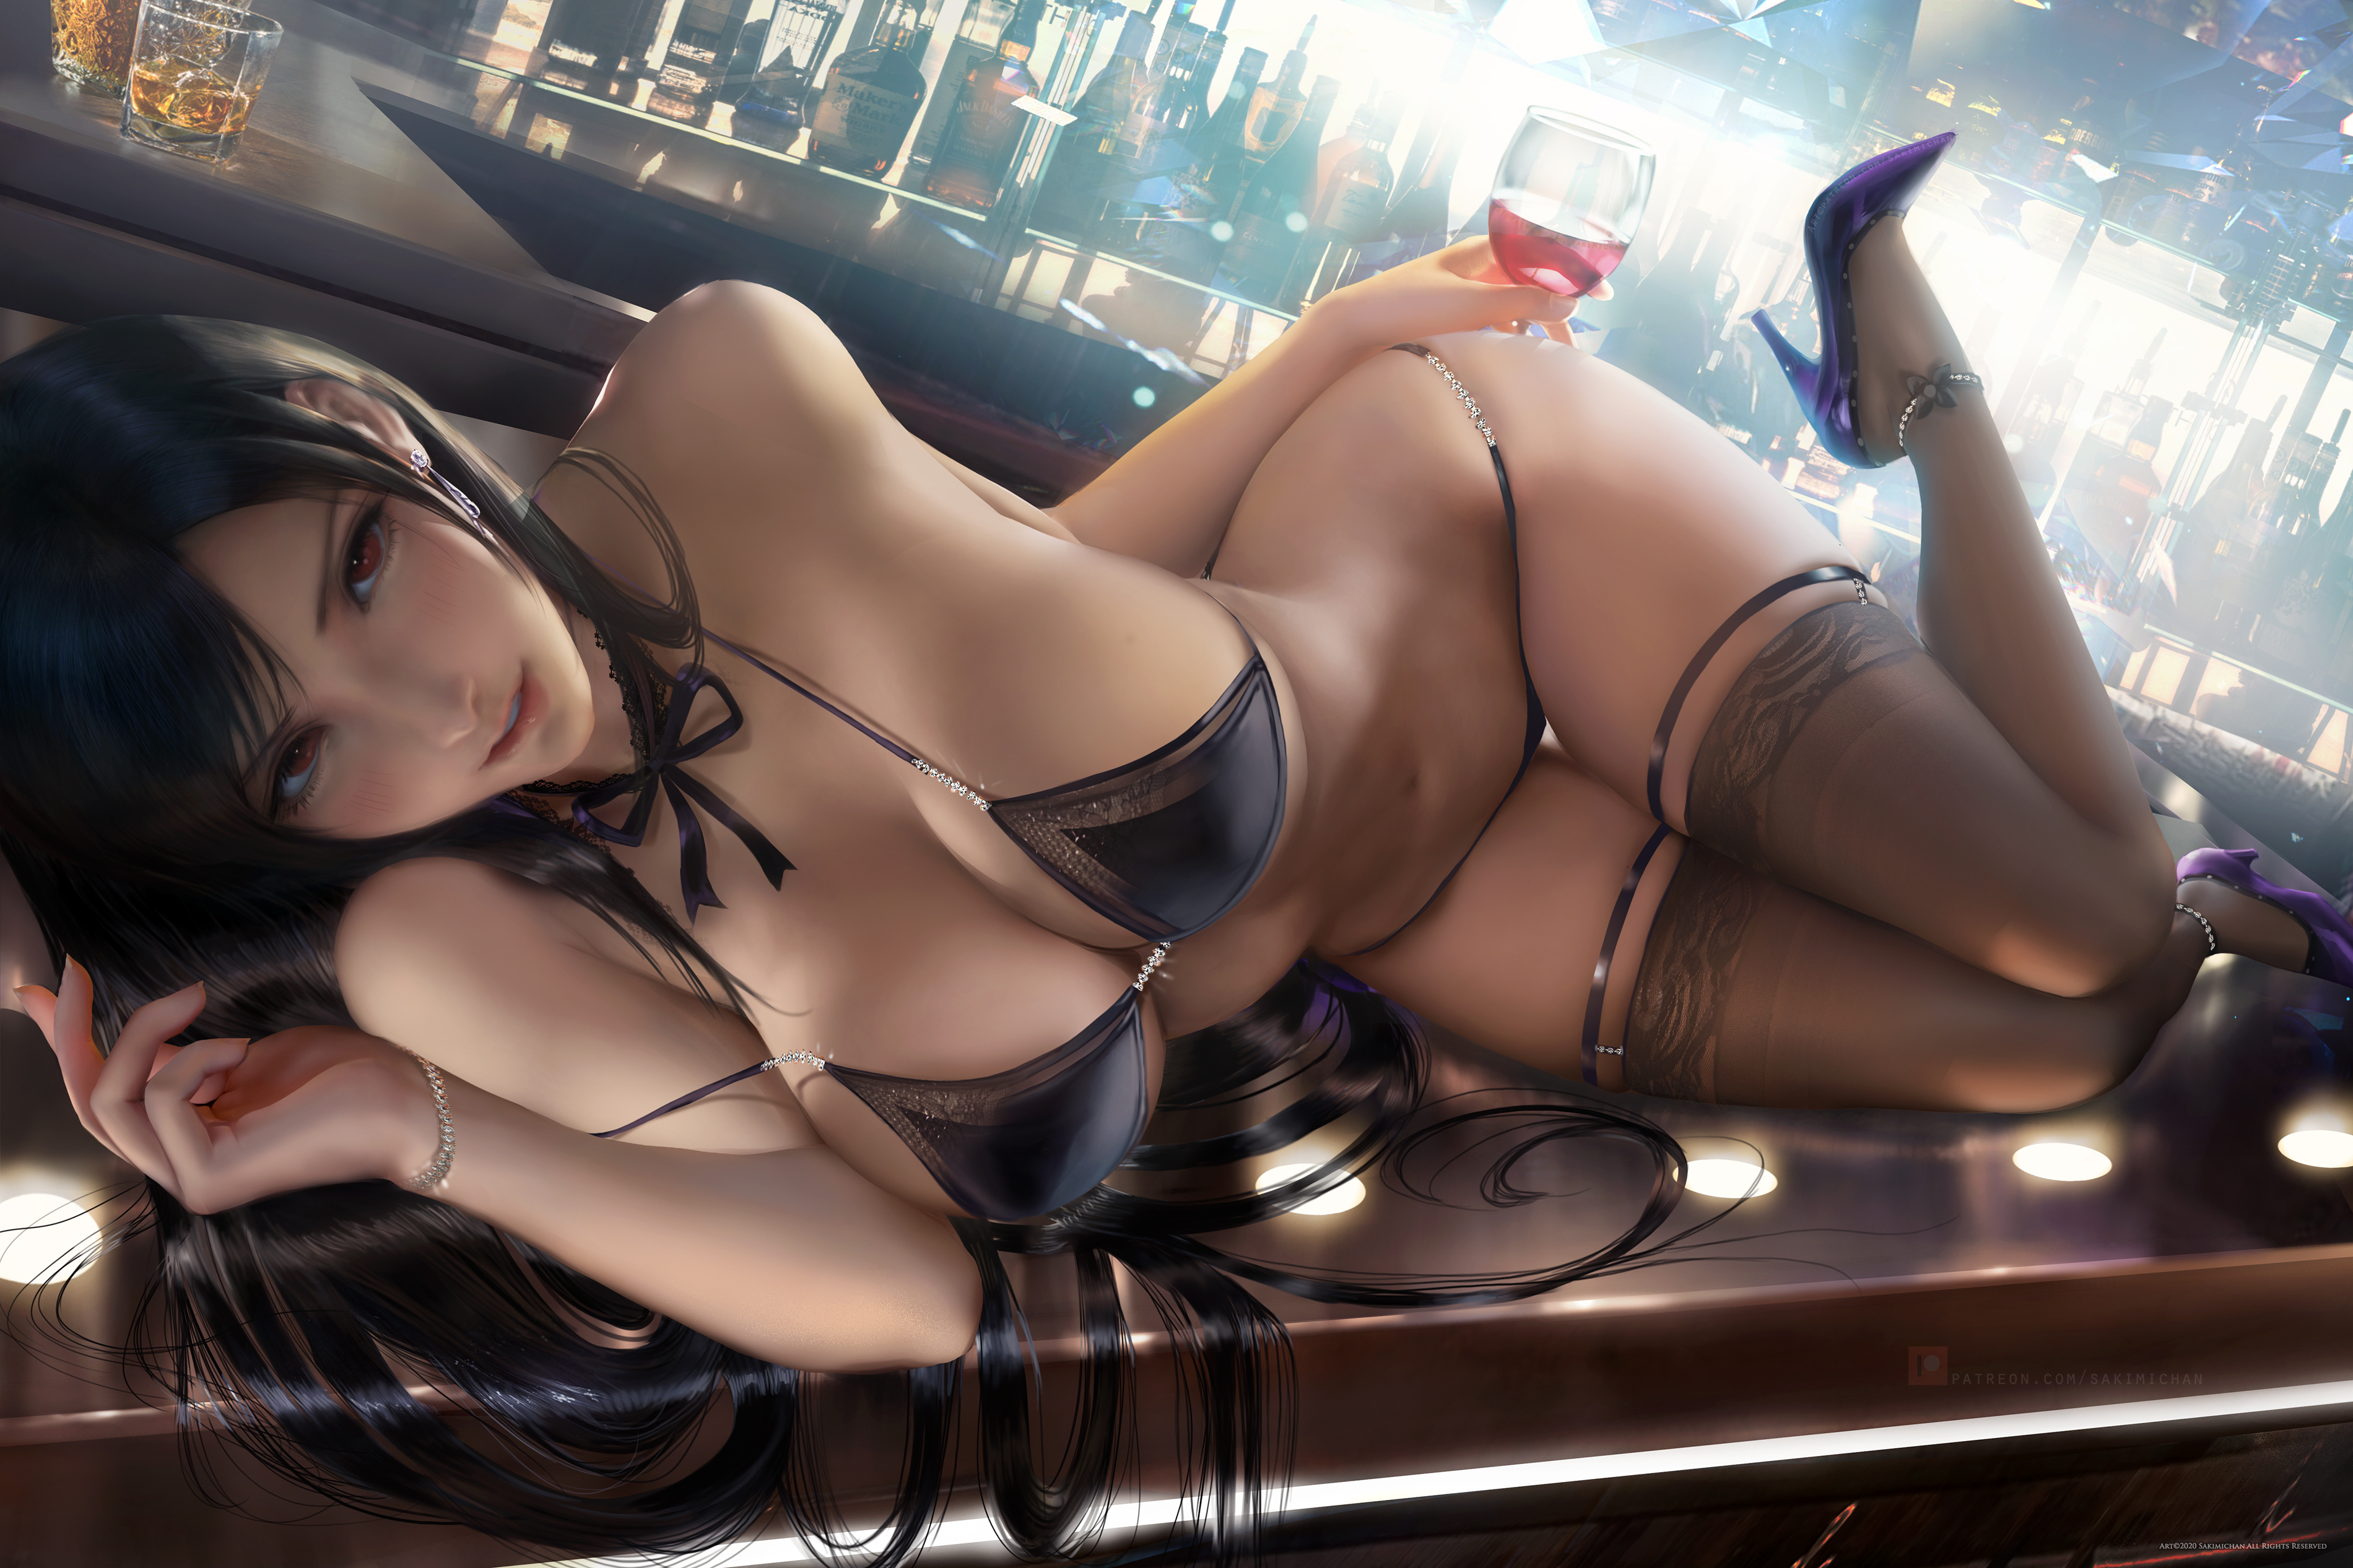 General 3800x2533 Sakimichan digital art Tifa Lockhart Final Fantasy Final Fantasy VII illustration lingerie video games video game characters video game girls brunette long hair cleavage looking at viewer thigh-highs high heels glass red eyes belly legs